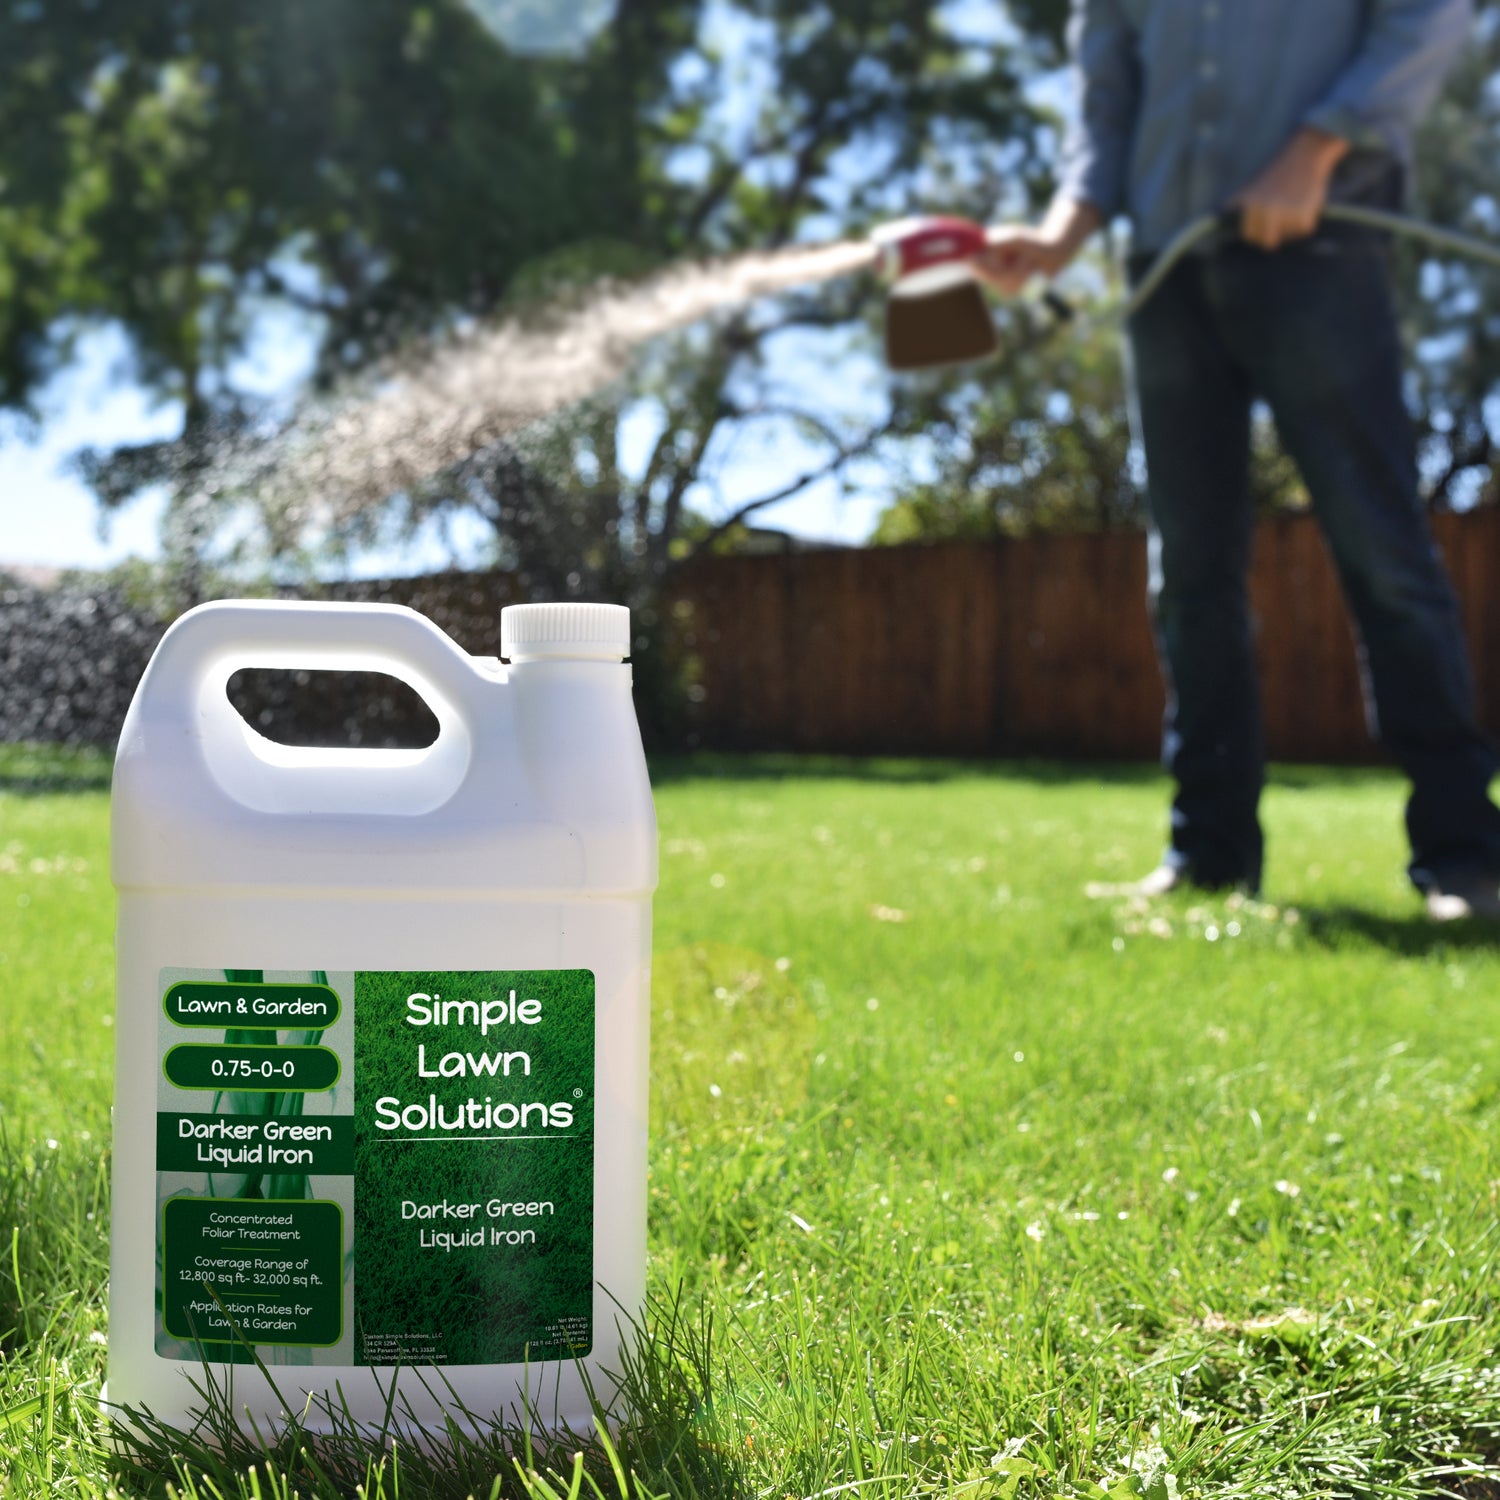 Darker Green Liquid Iron (1 Gallon) by Simple Lawn Solutions on a lawn